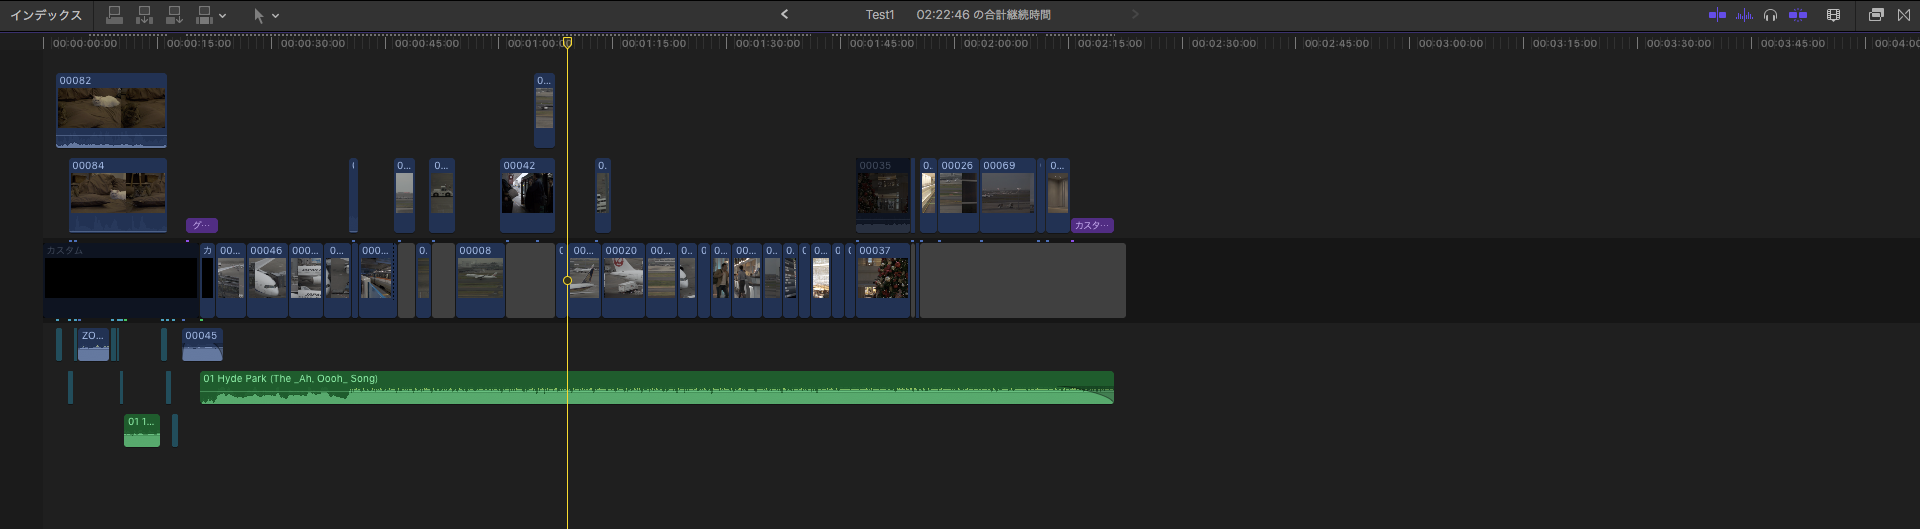 timeline_fcpx